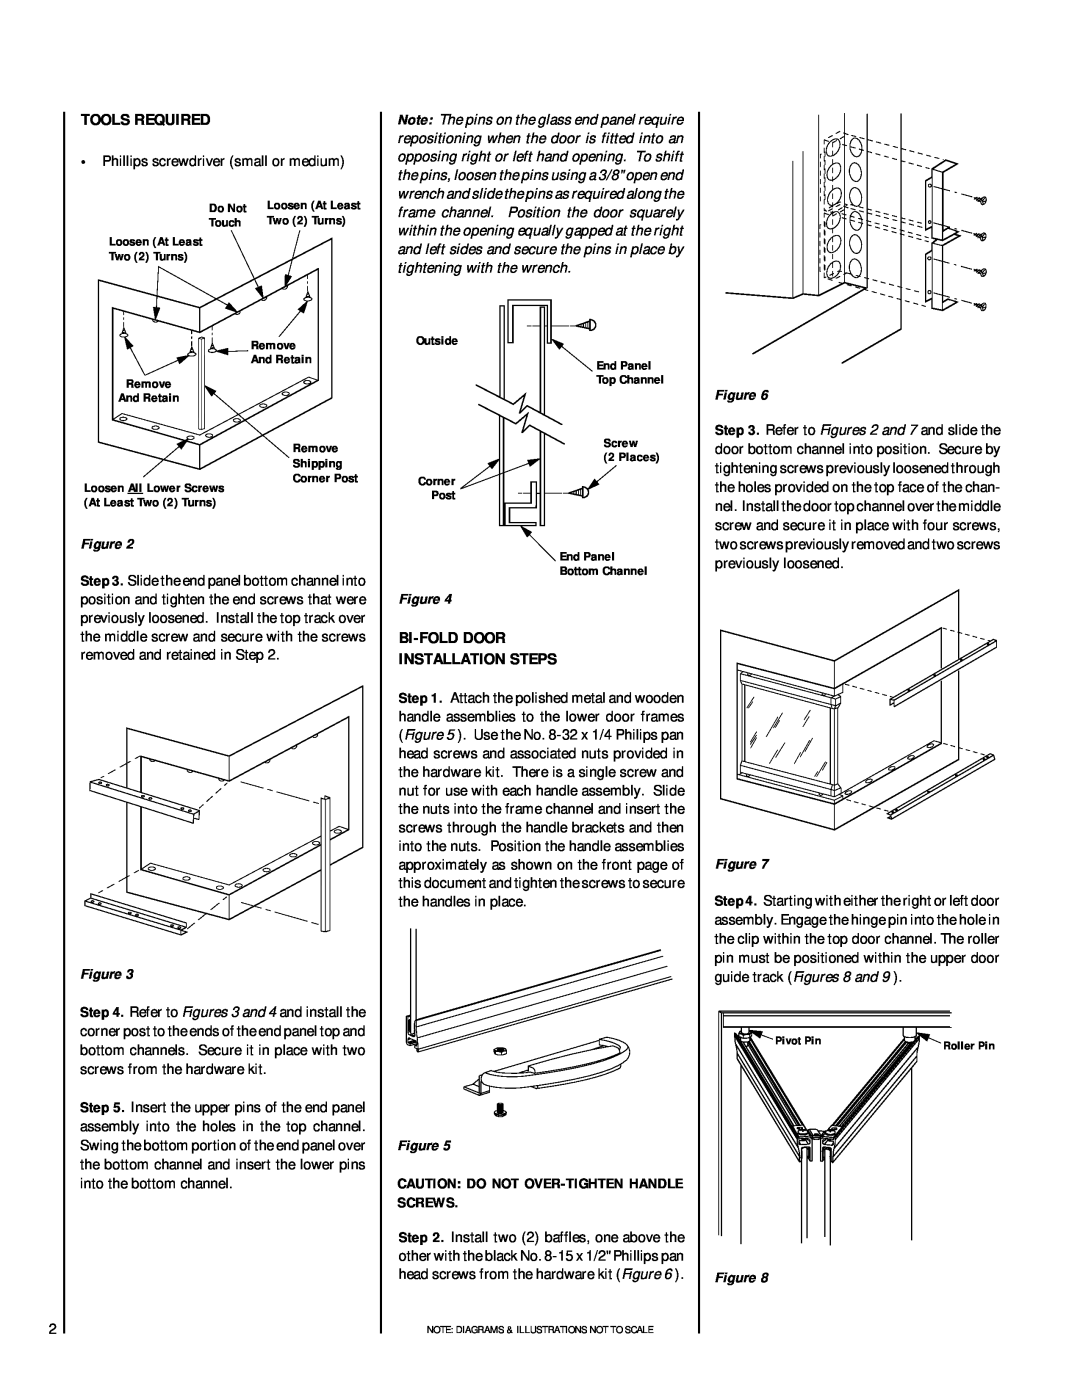 Miele 38ACR installation instructions Tools Required, Bi-Folddoor Installation Steps 